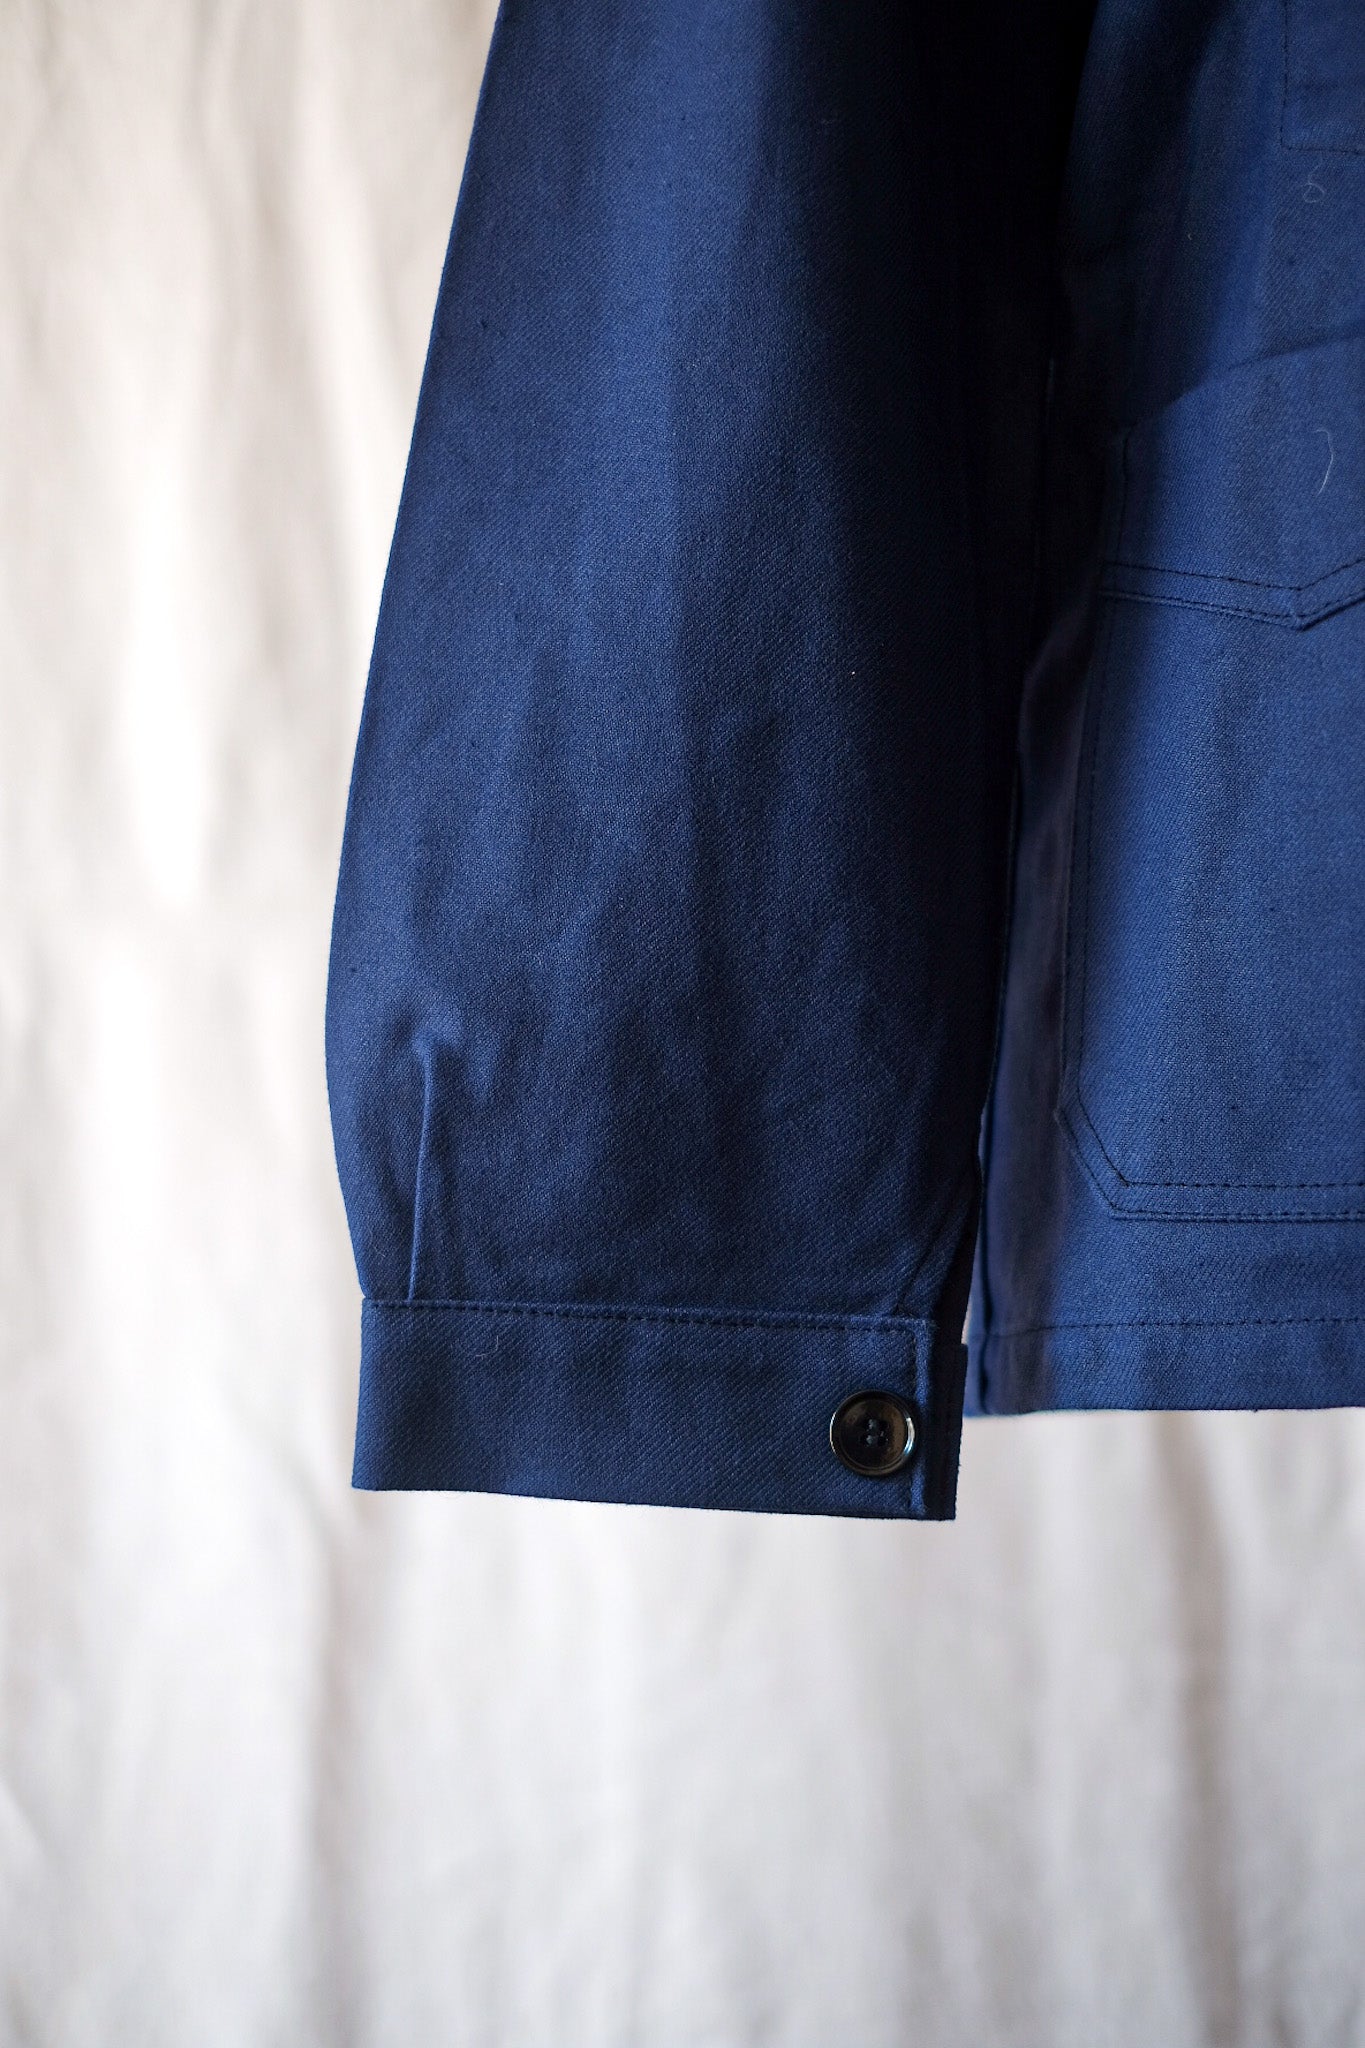 [~ 50's] French Vintage Blue Cotton Twill Work Jacket "Dead Stock"